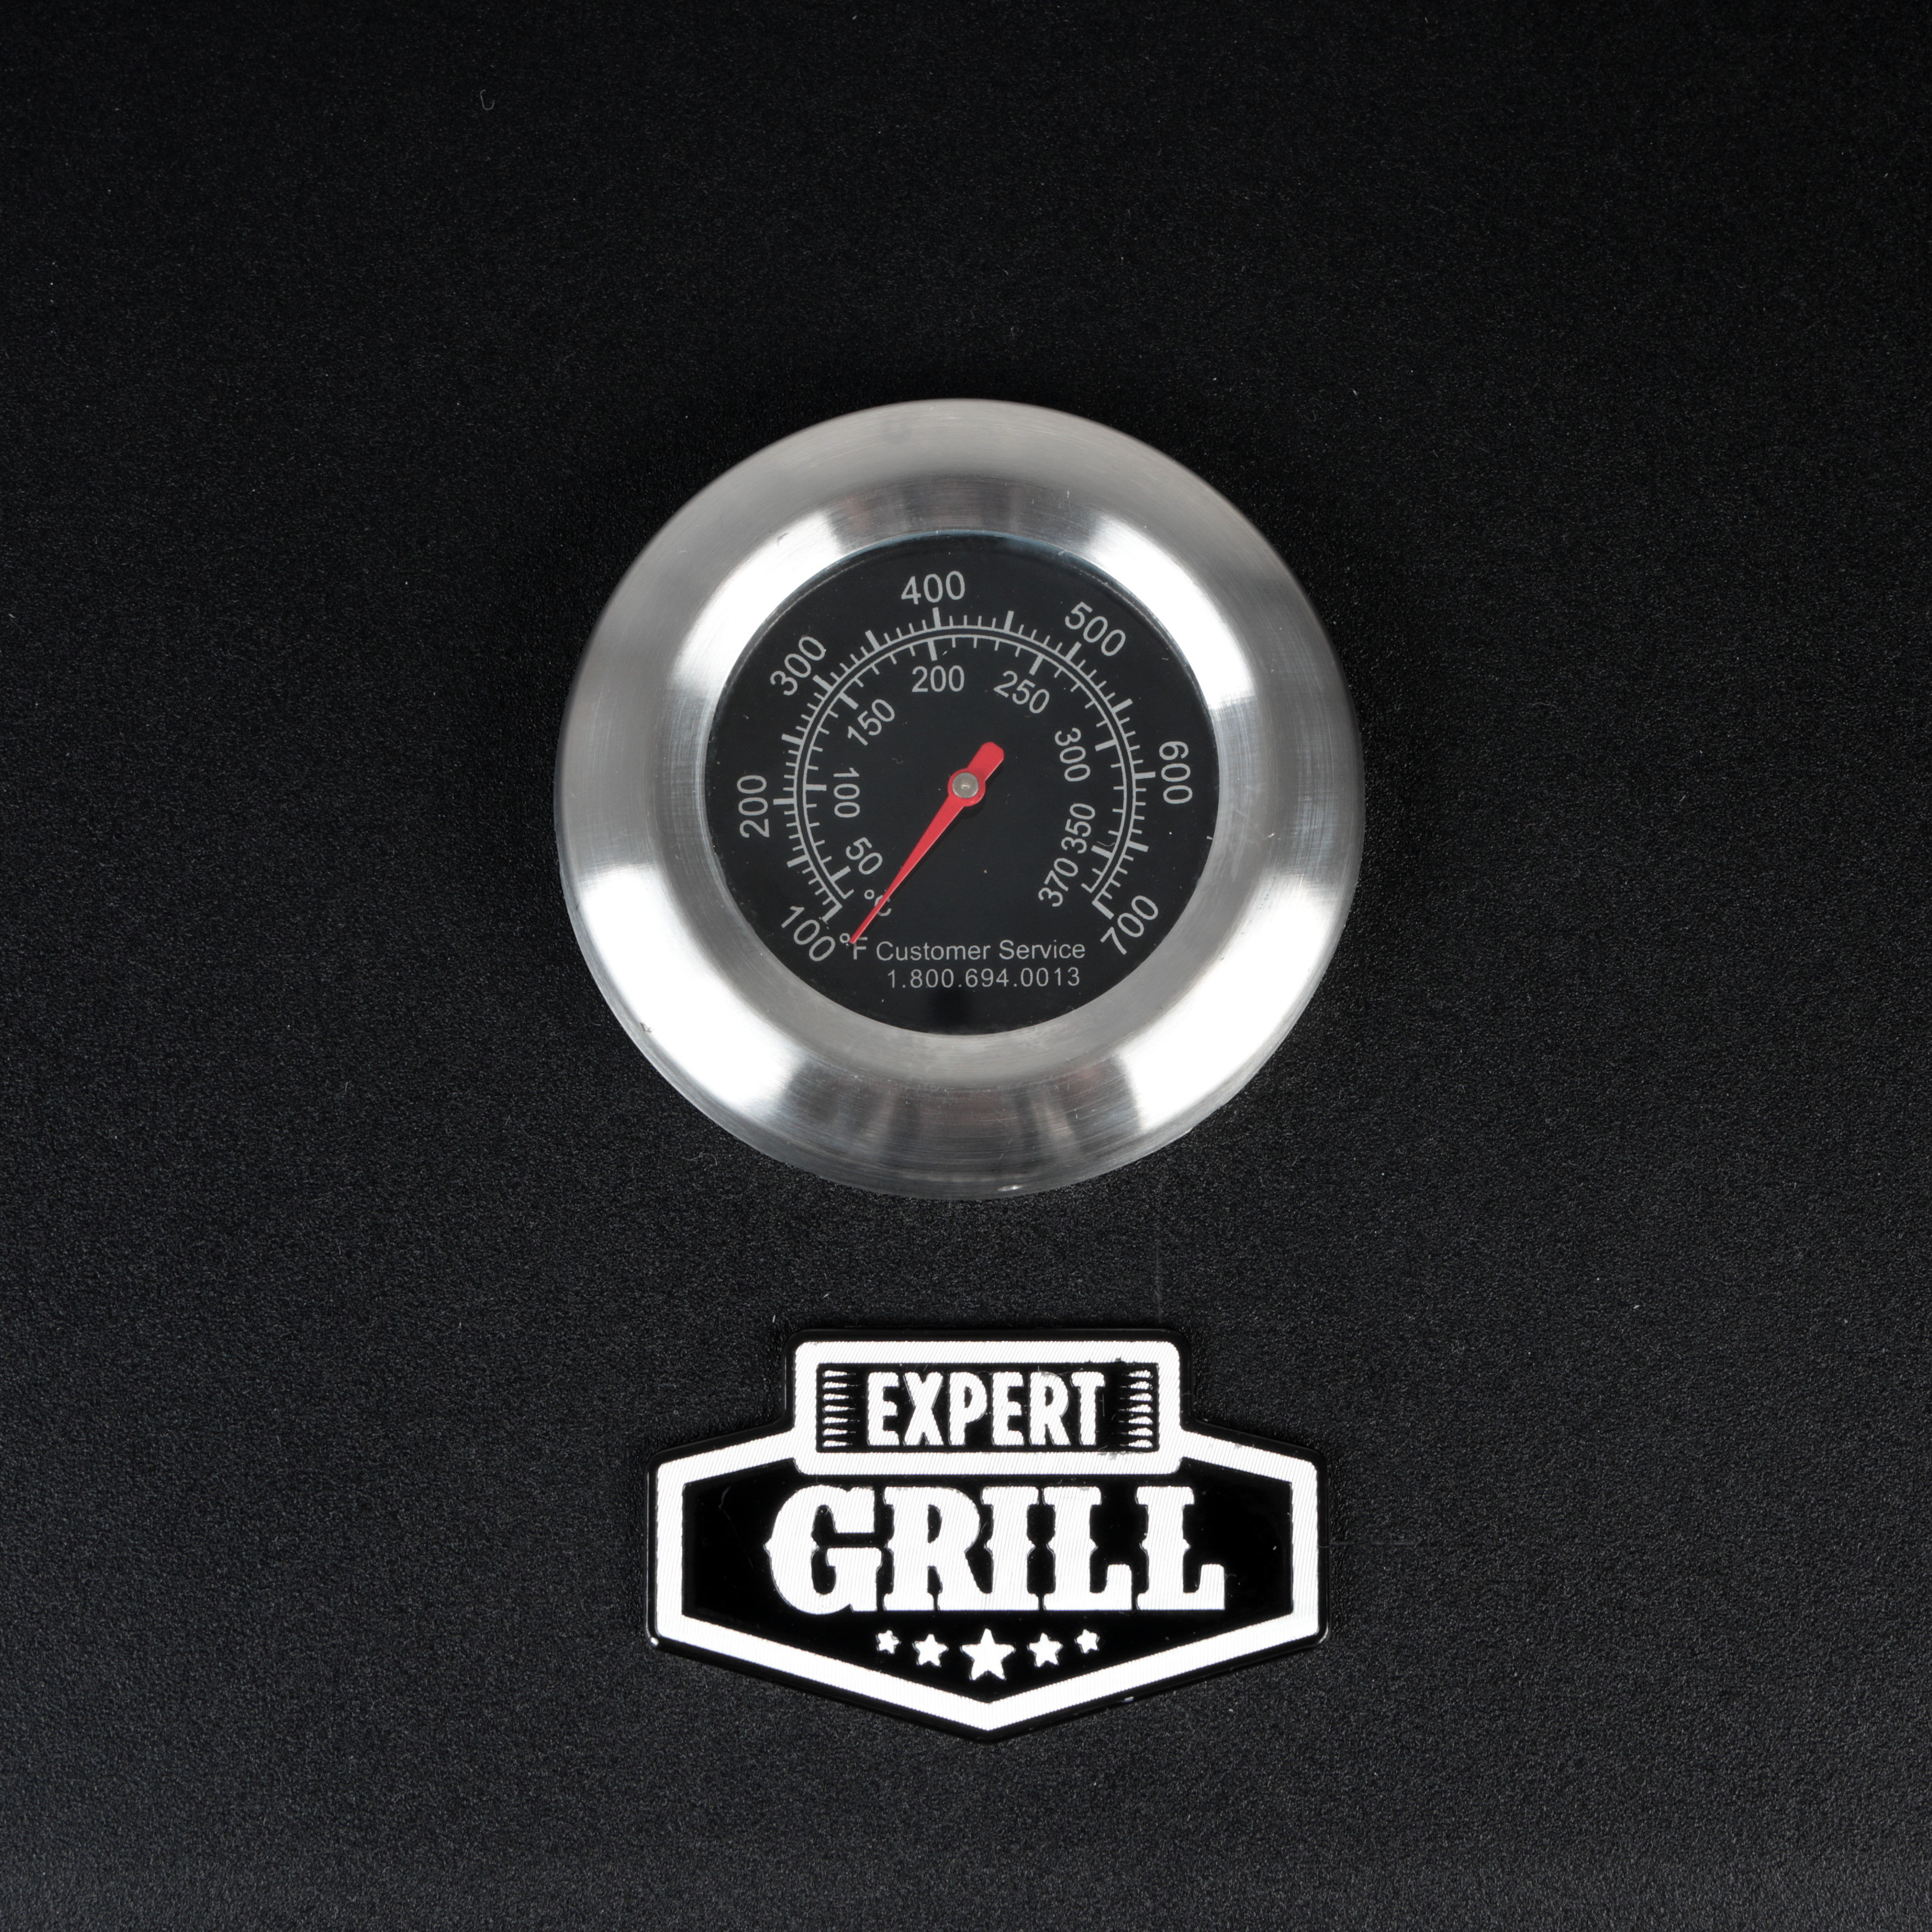 Expert Grill Premium Portable Charcoal Grill, Black and Stainless Steel - image 8 of 18